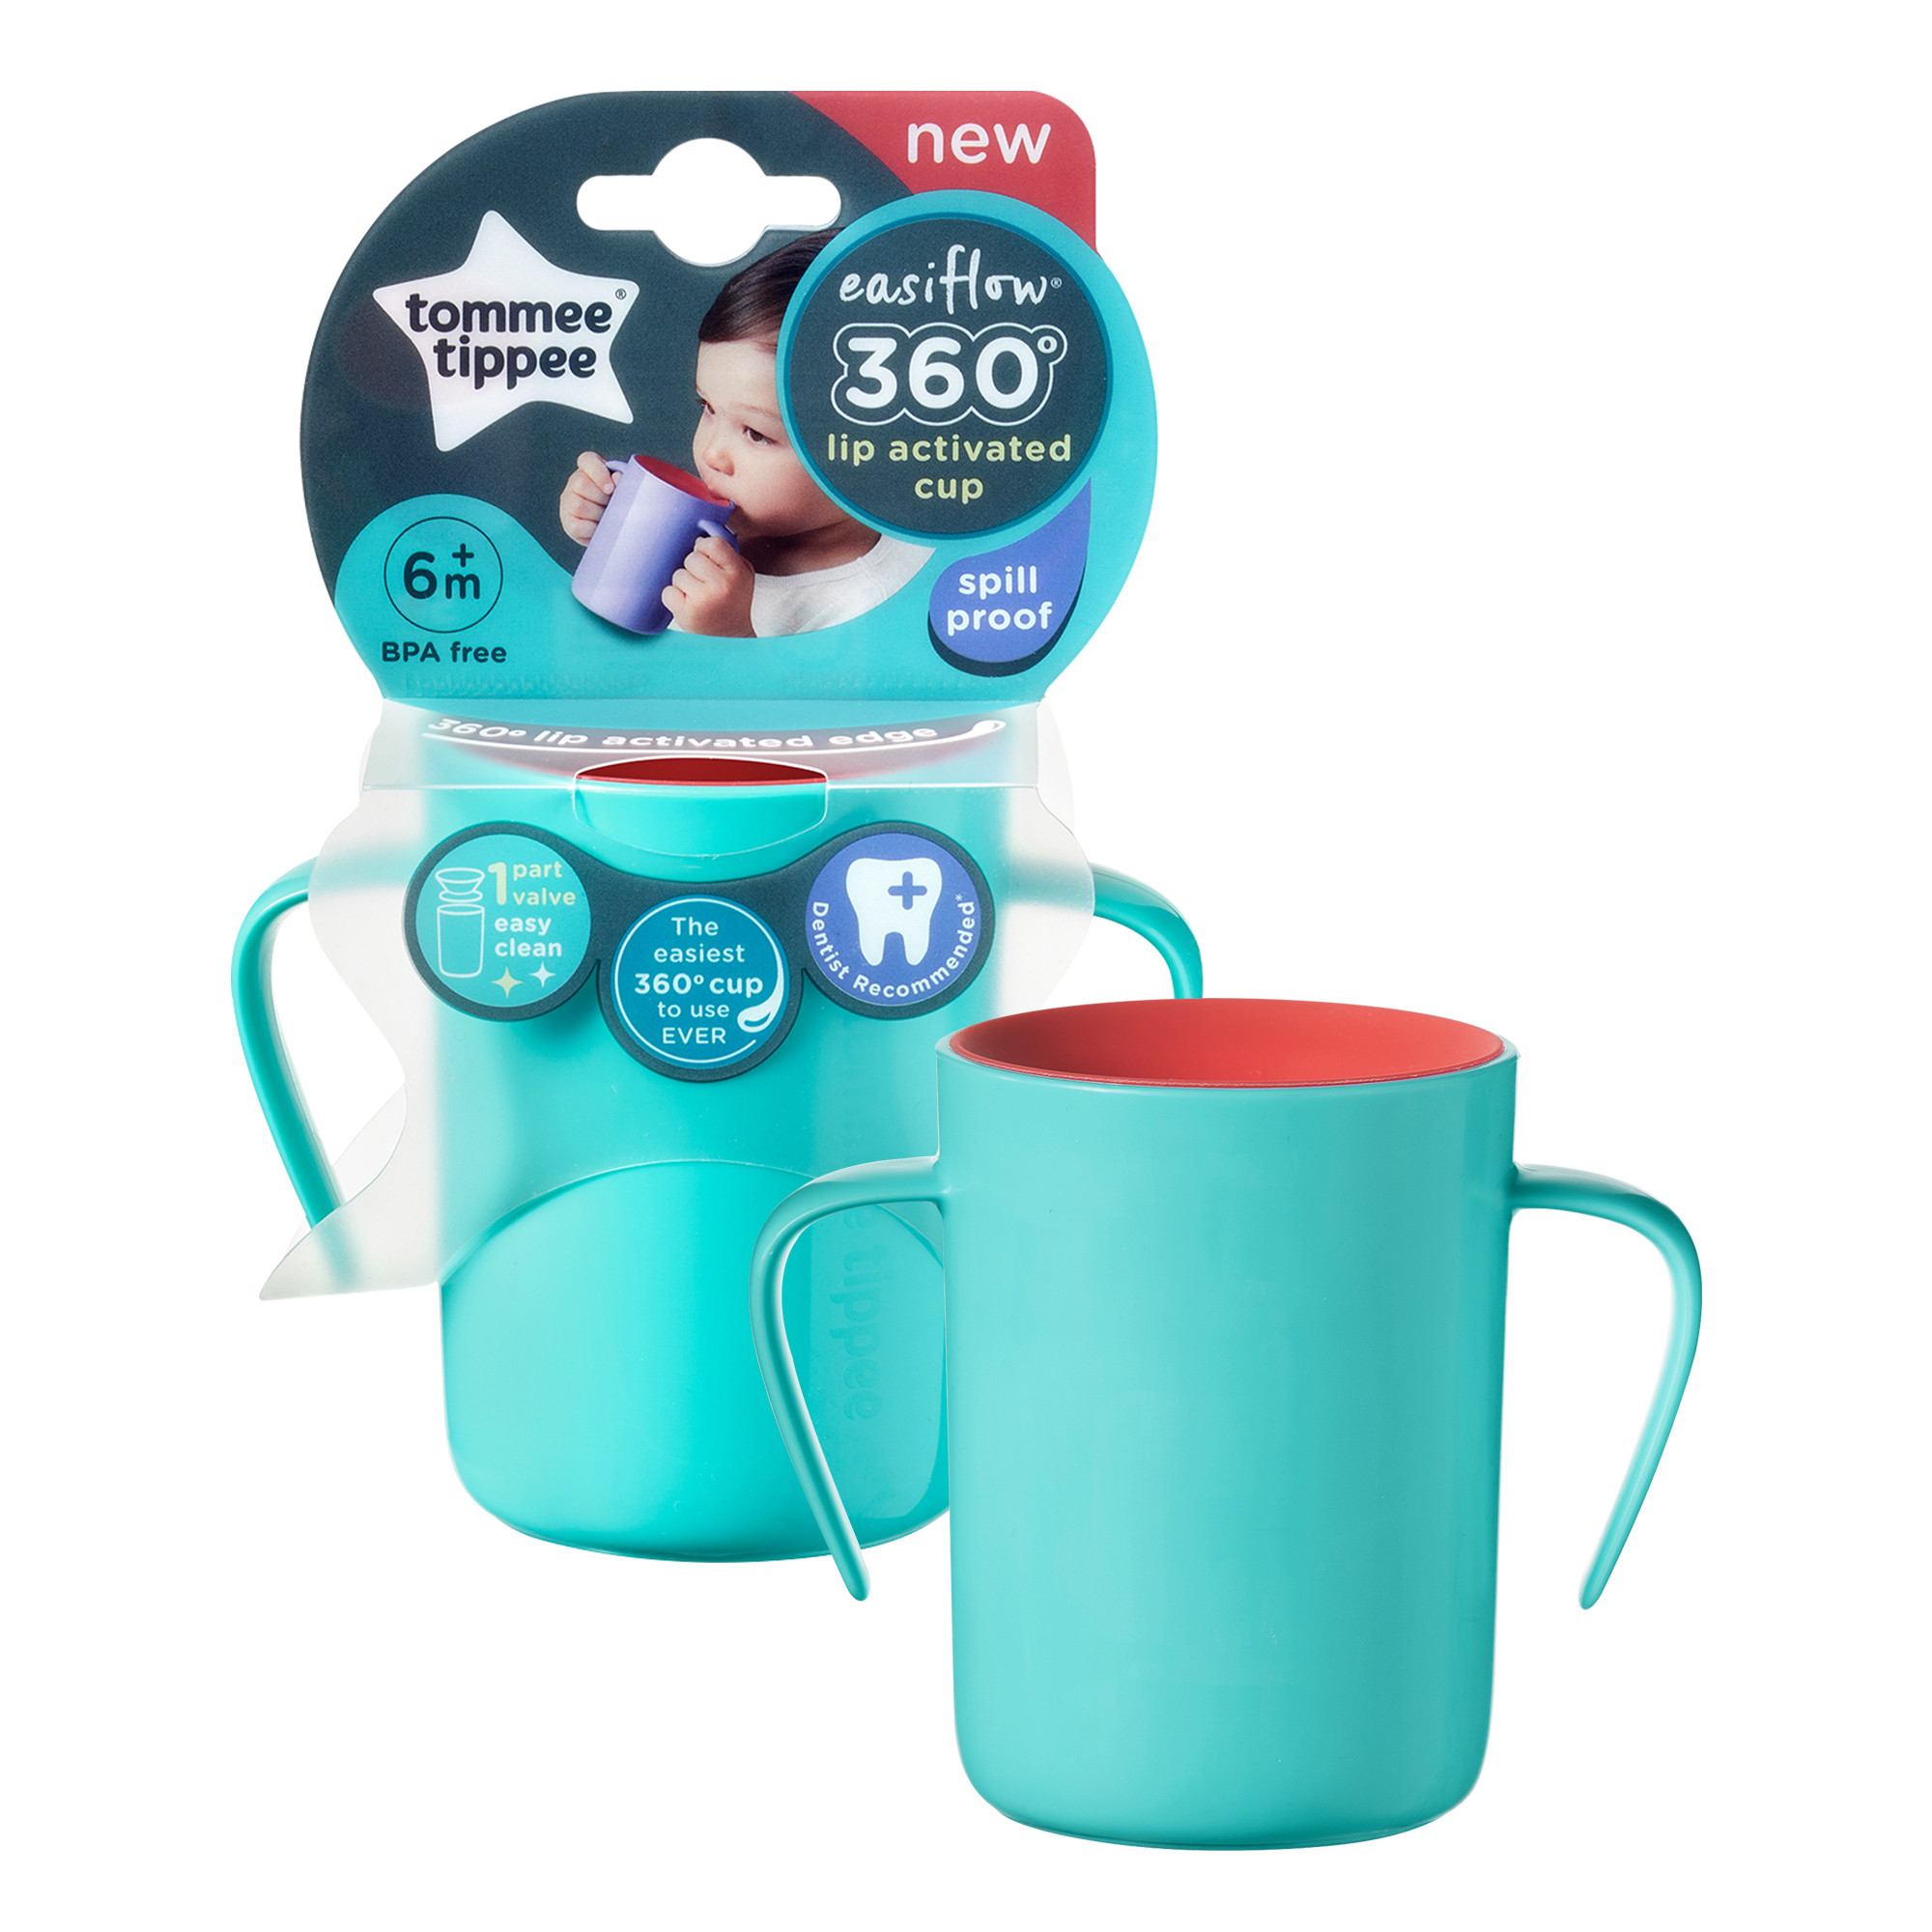 https://www.consobaby.co.uk/media/catalog/product/cache/1/image/9df78eab33525d08d6e5fb8d27136e95/4/4/447209_tt_360_handled_cup_green_merged/Easiflow-360-Cup-Tommee-Tippee-31.jpg